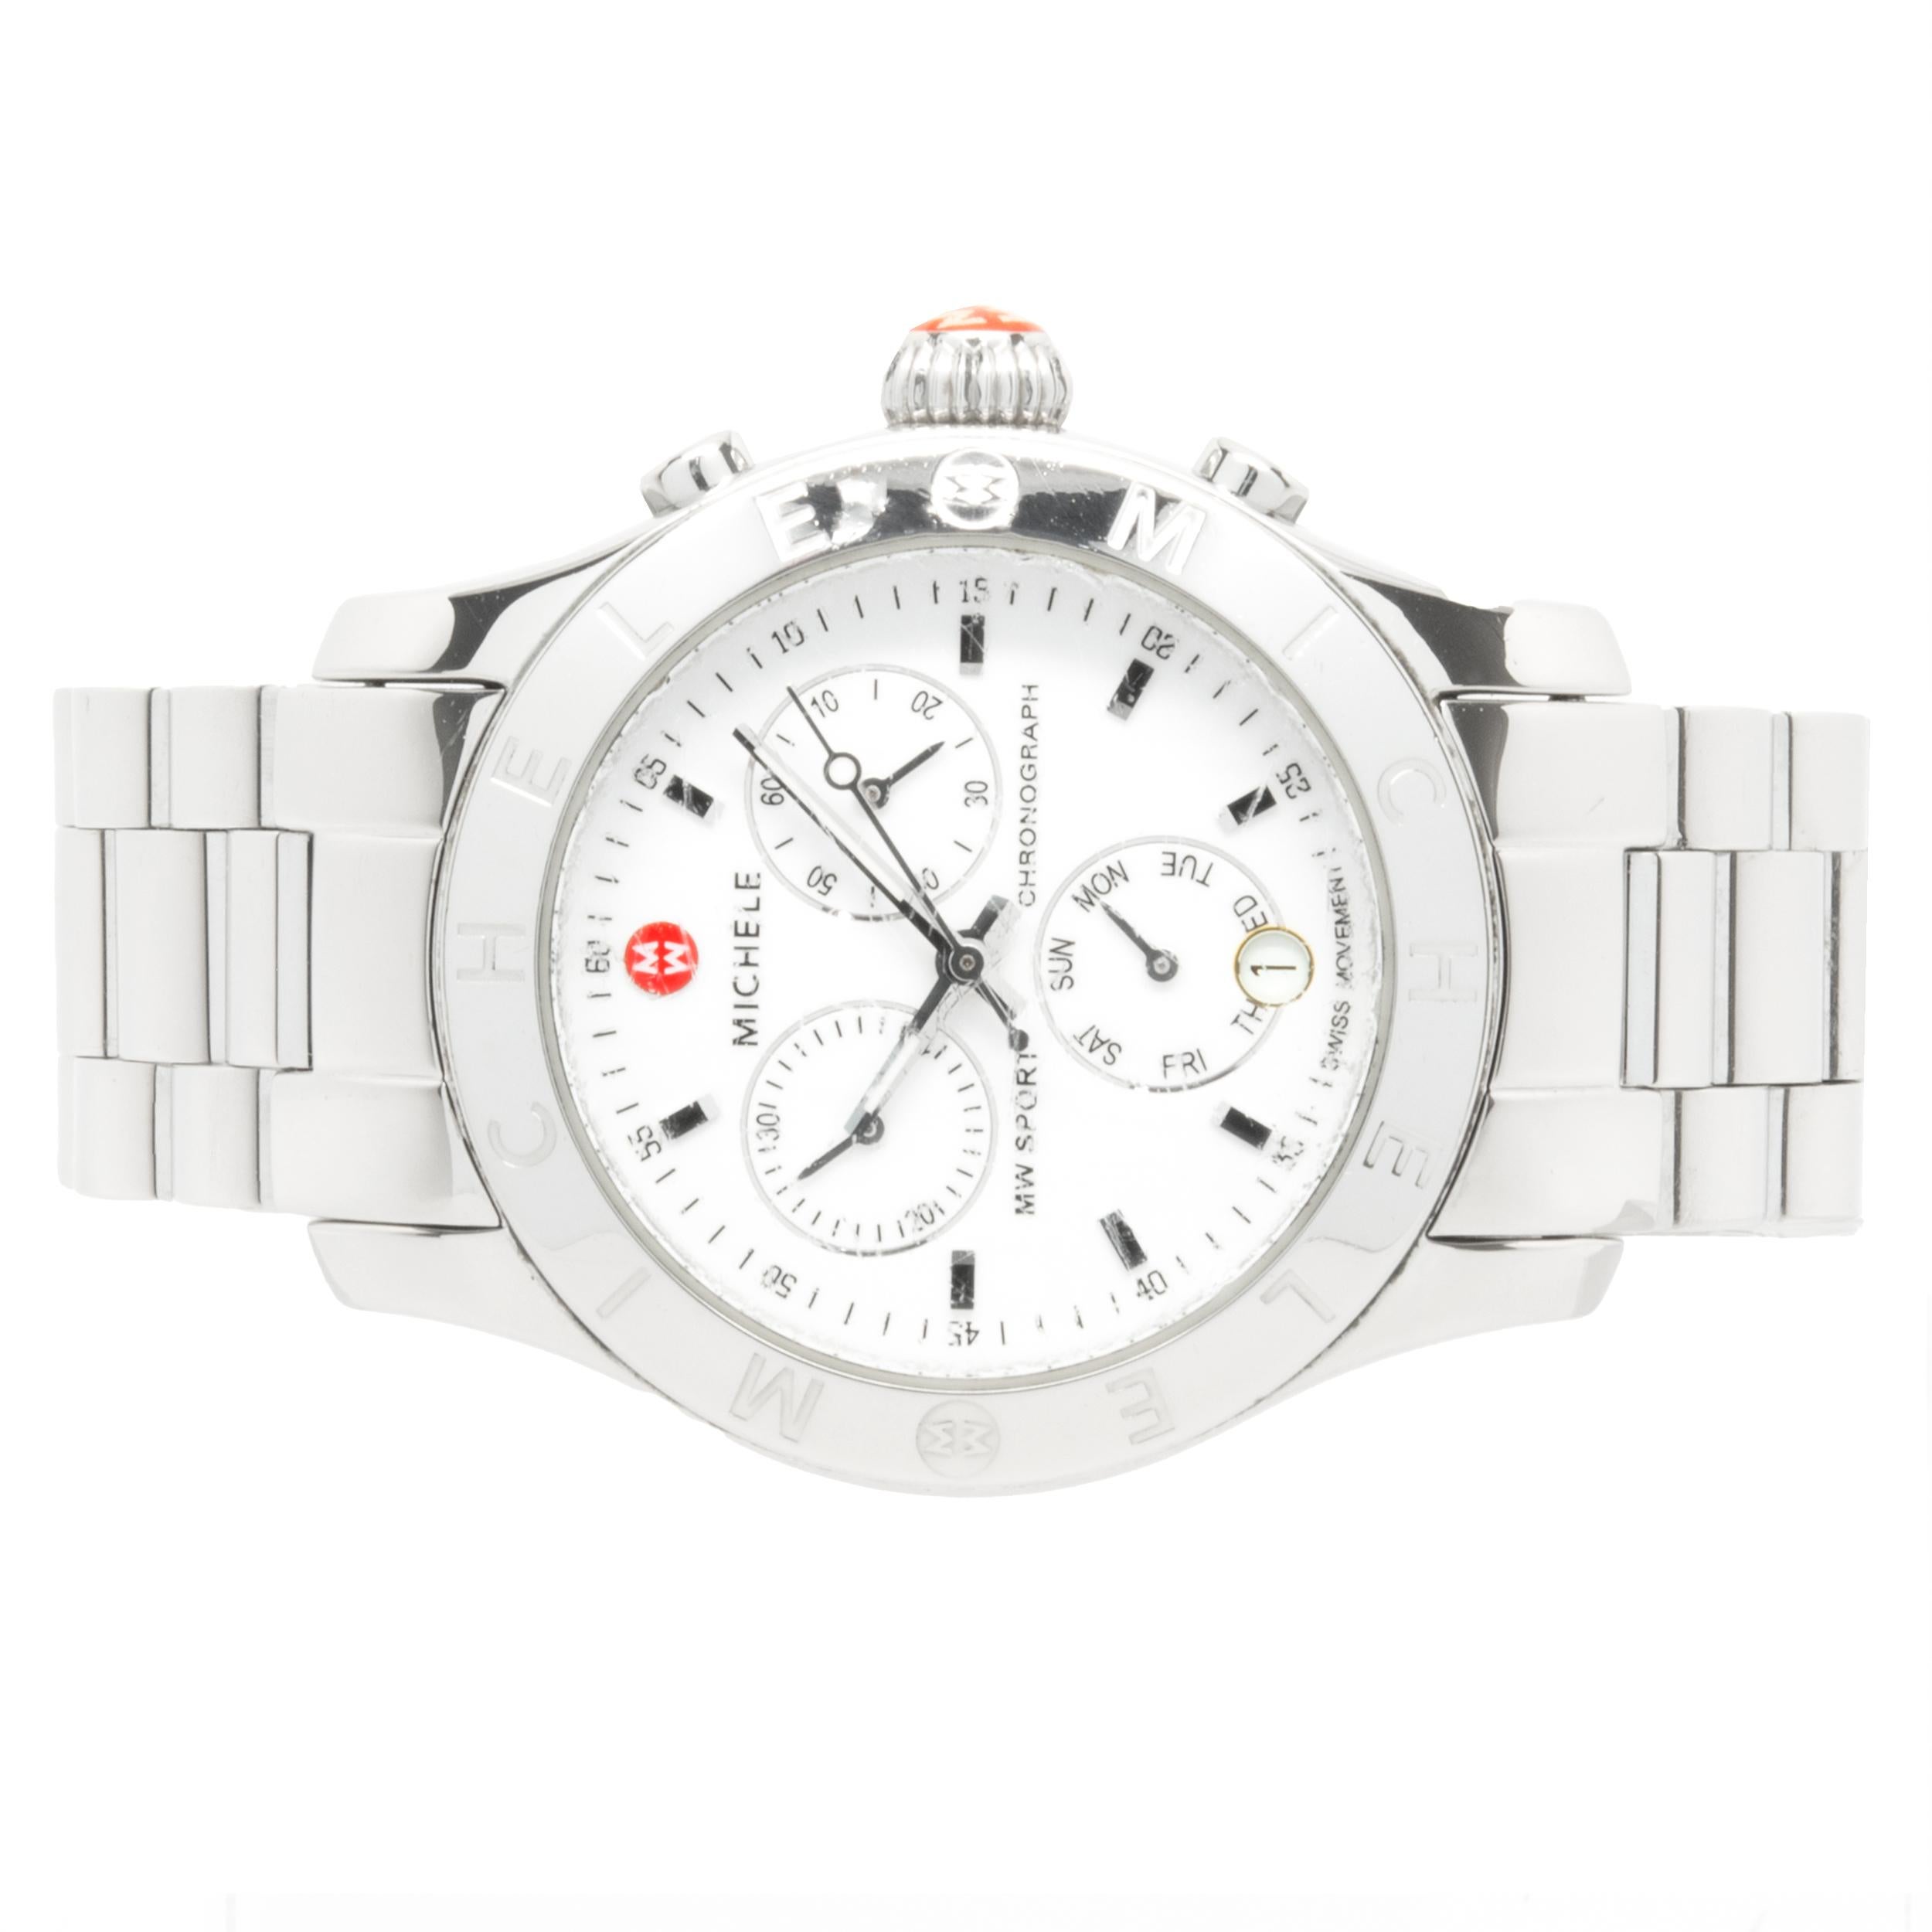 Movement: quartz
Function: hours, minutes, seconds, date, chronograph 
Case: 35mm stainless round case, smooth bezel, sapphire crystal
Dial: white chronograph
Band: stainless steel bracelet, deployment clasp
Serial #: MS04XXX
Reference #: